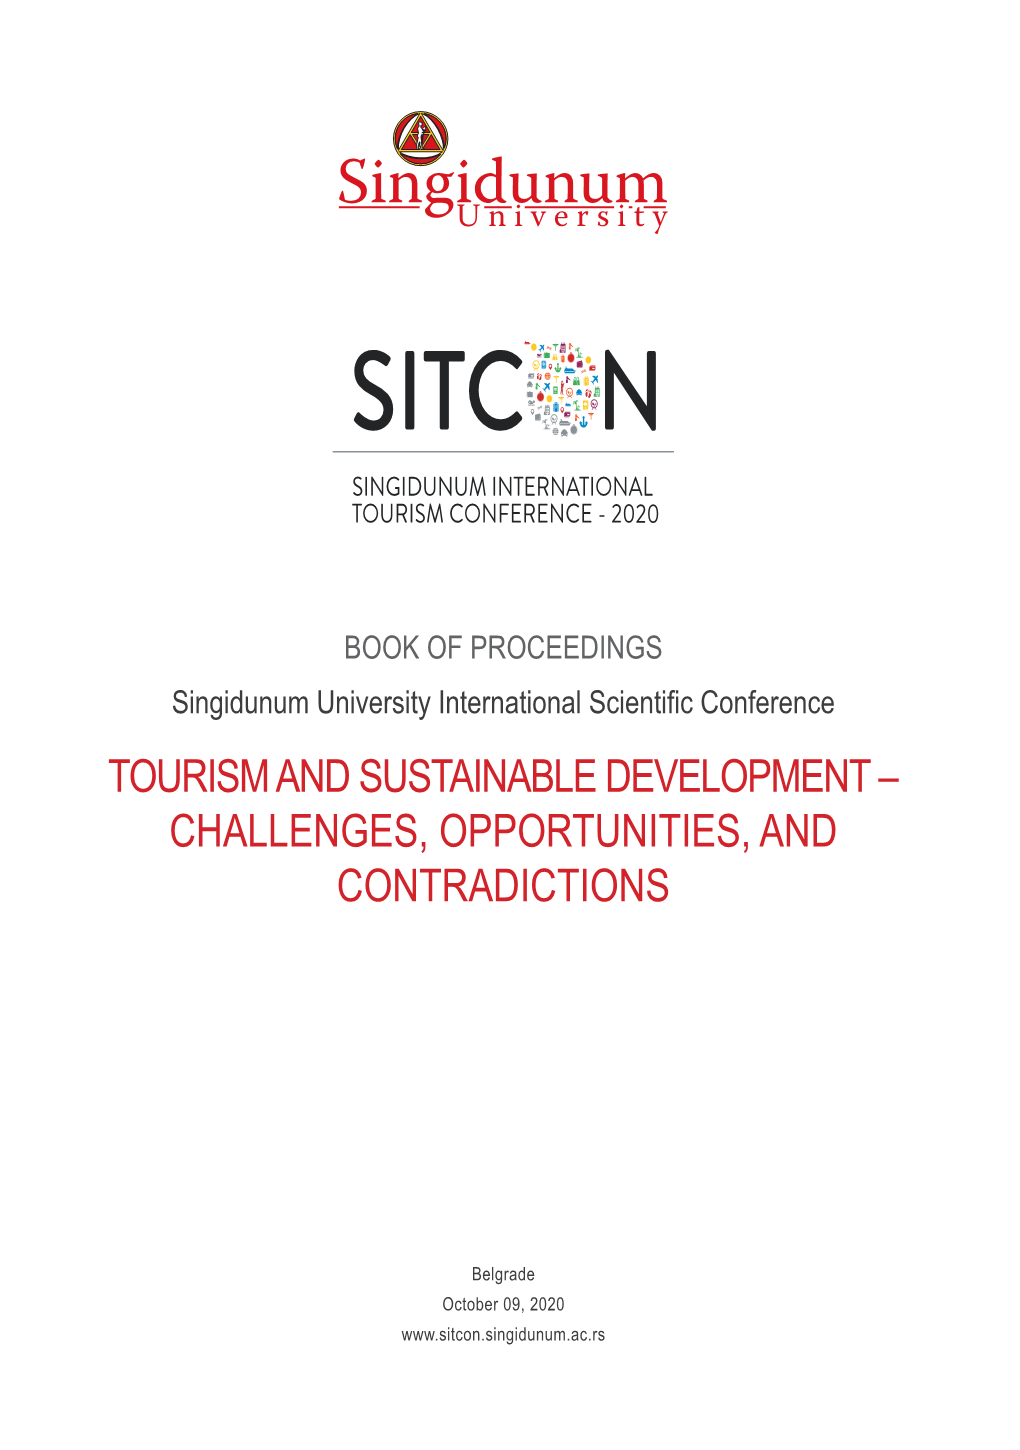 Tourism and Sustainable Development – Challenges, Opportunities, and Contradictions